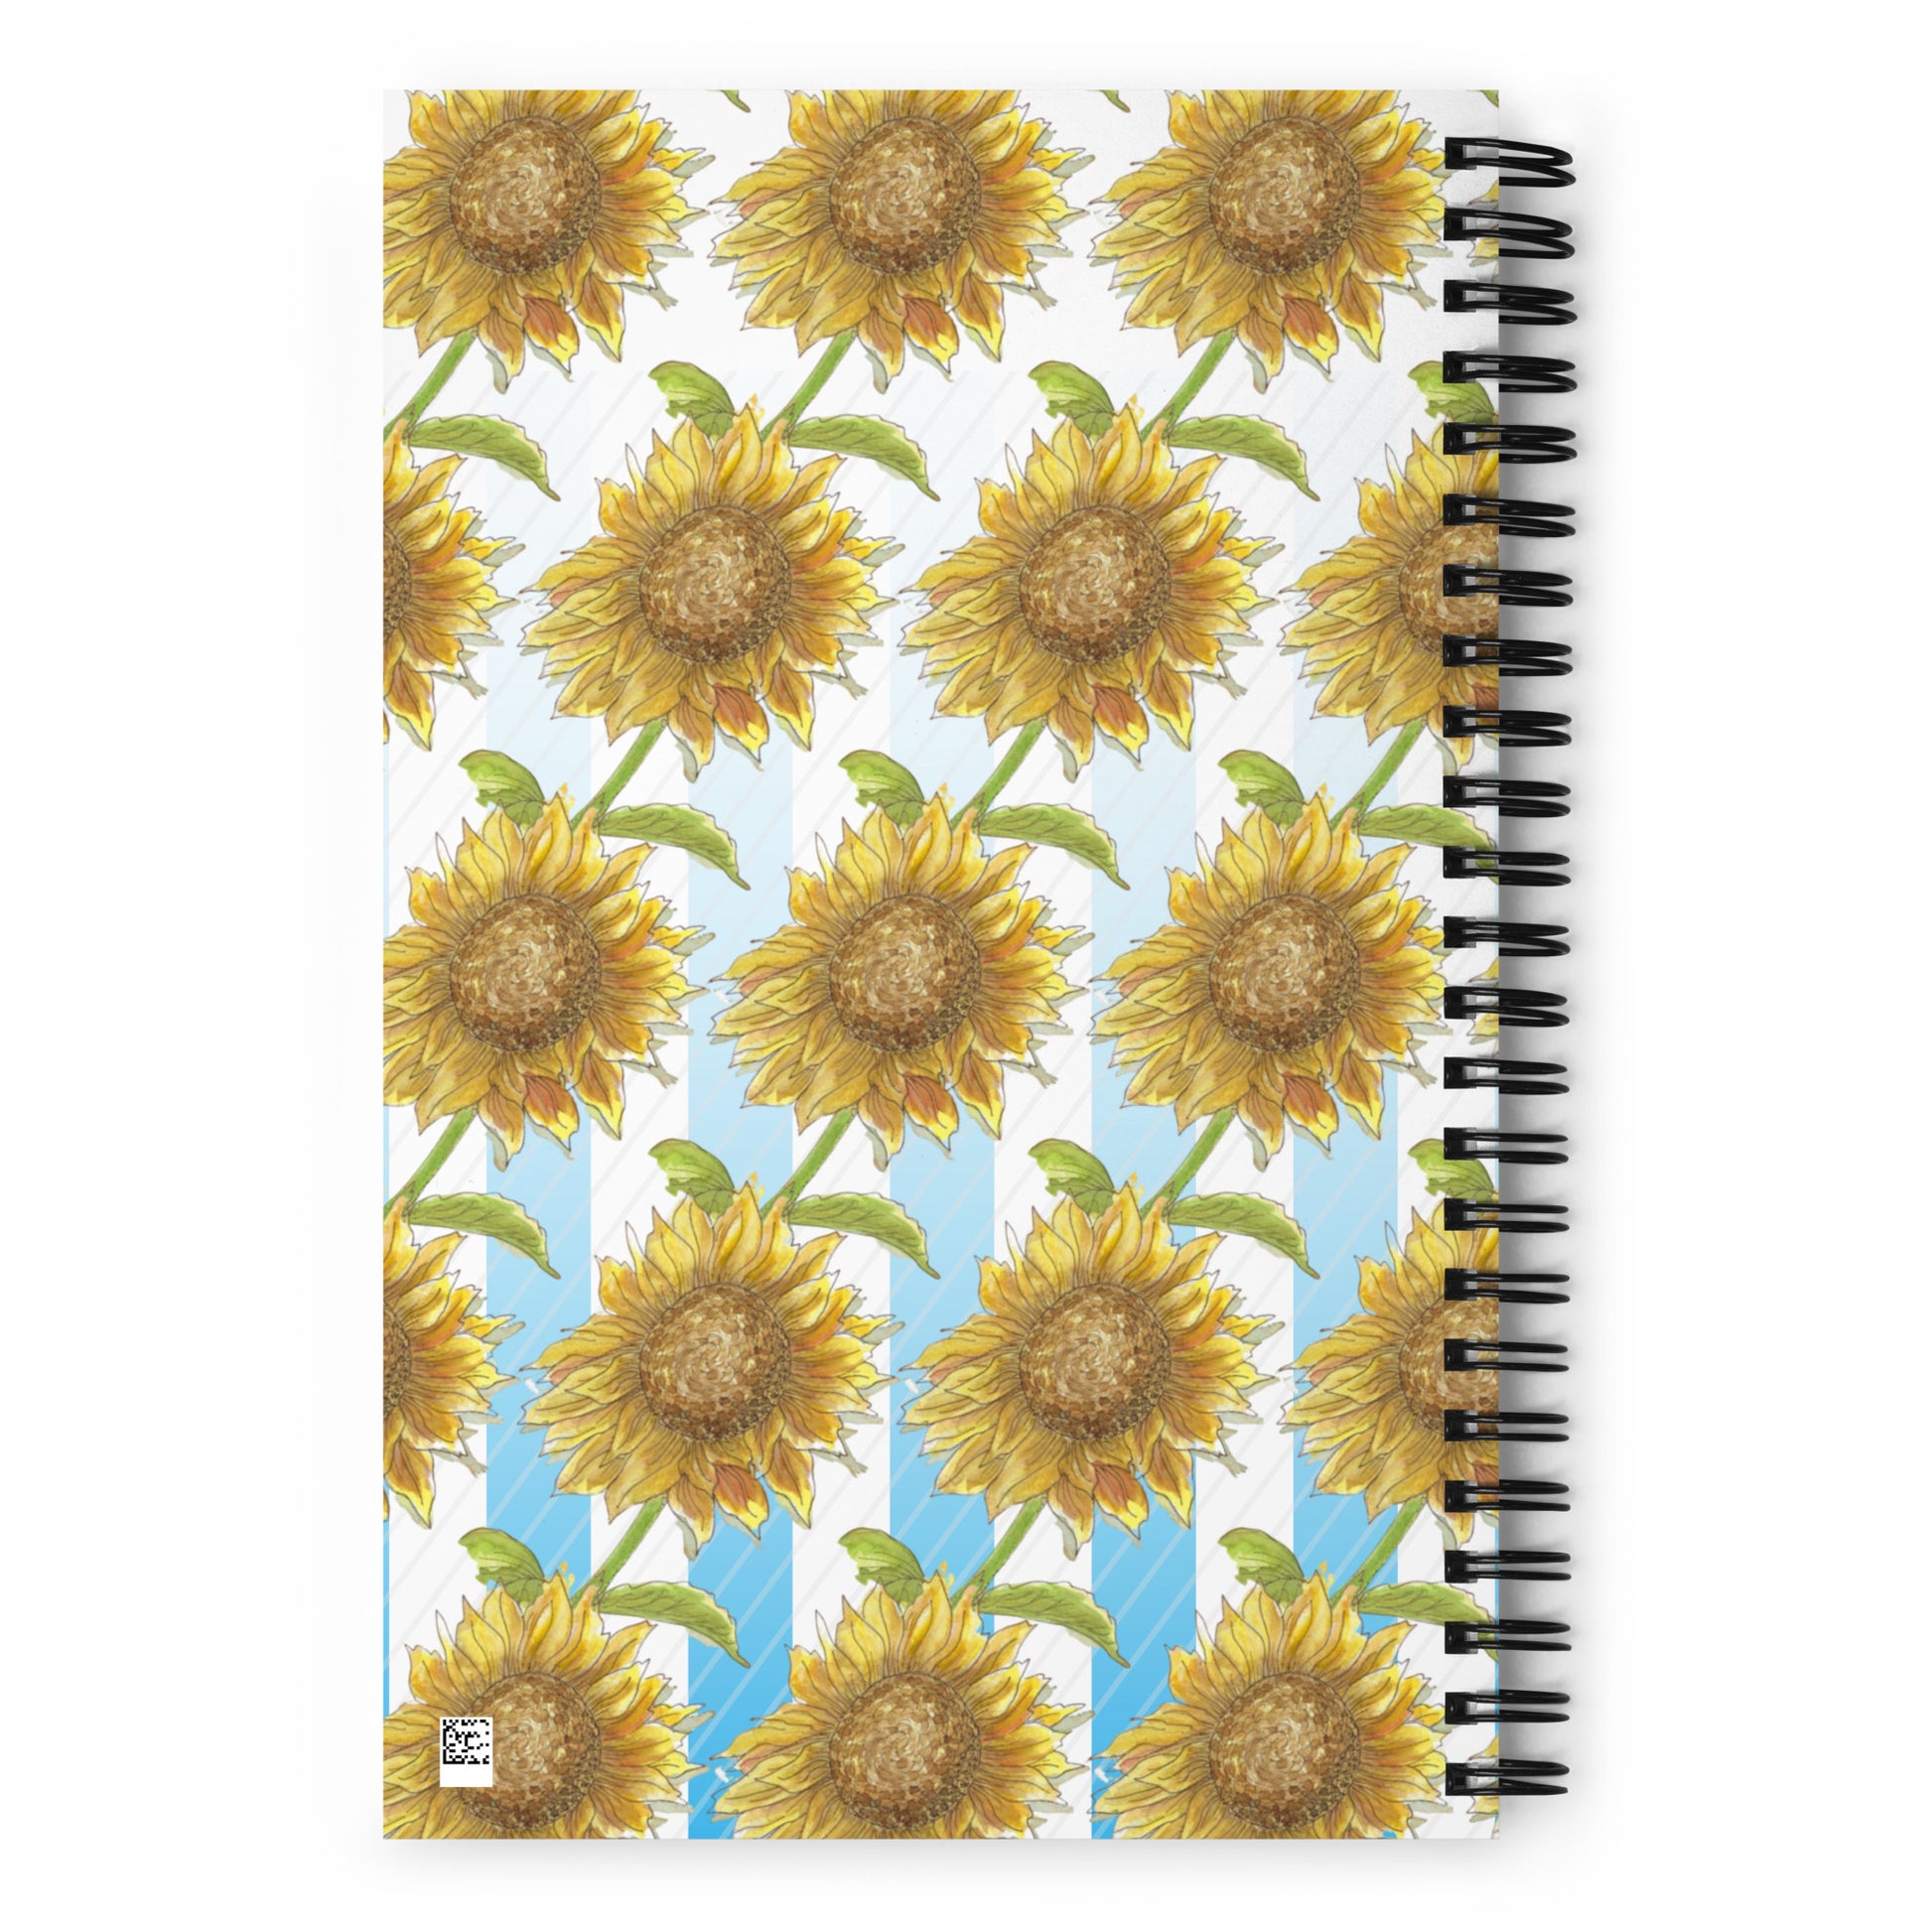 Spiral bound notebook with soft touch cover and 140 dotted pages. Cover features a pattern of watercolor sunflowers and blue and white stripes. Front has inspirational phrase "find your sunshine." Measures 5.5 inches by 8.5 inches. Image shows back of notebook.